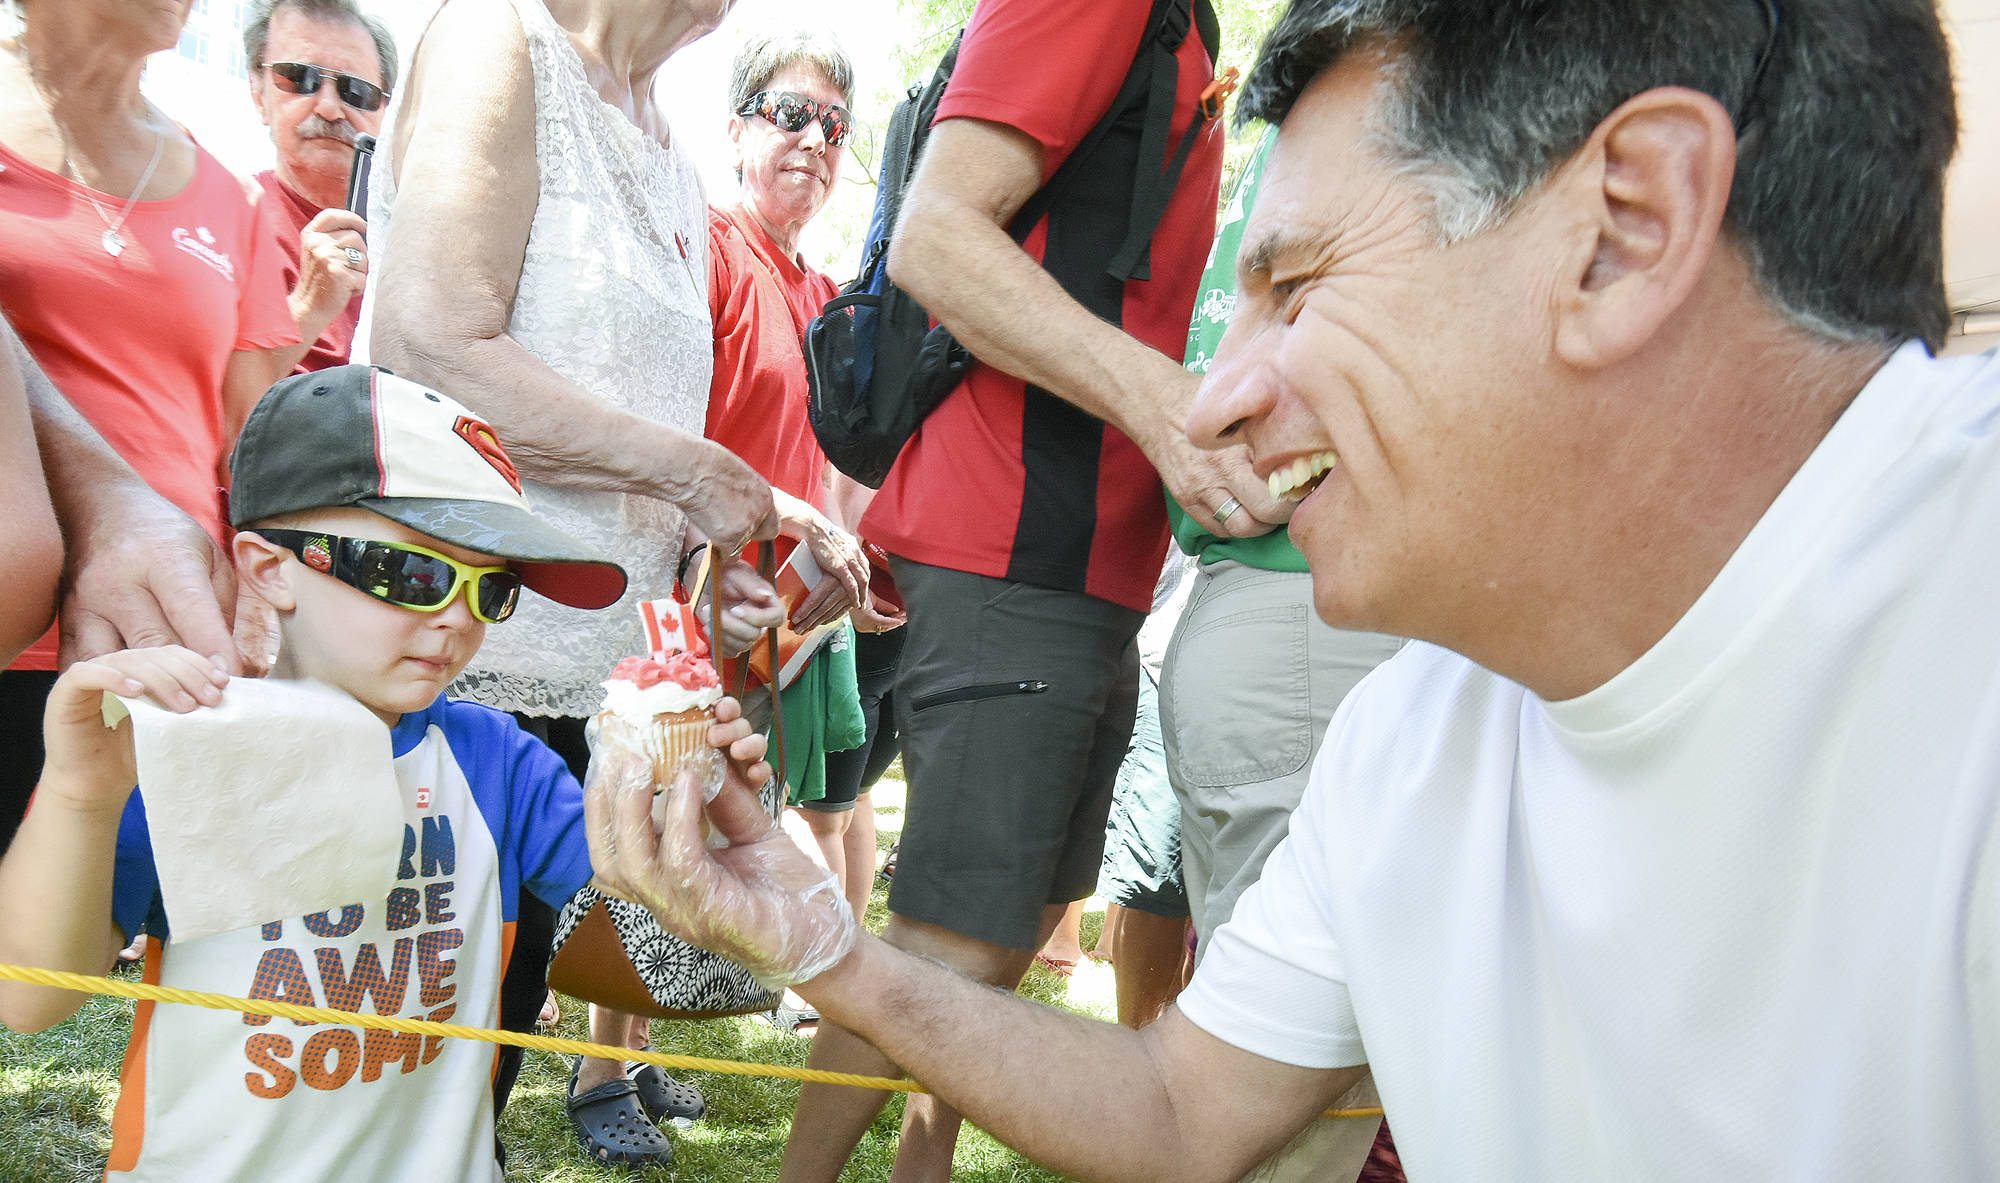 MLA Dan Ashton gives four-year-old Michael Gilbert a piece of the Canada Day cup cake at the ceremonies at Gyro Park. (Mark Brett/Penticton Western News)